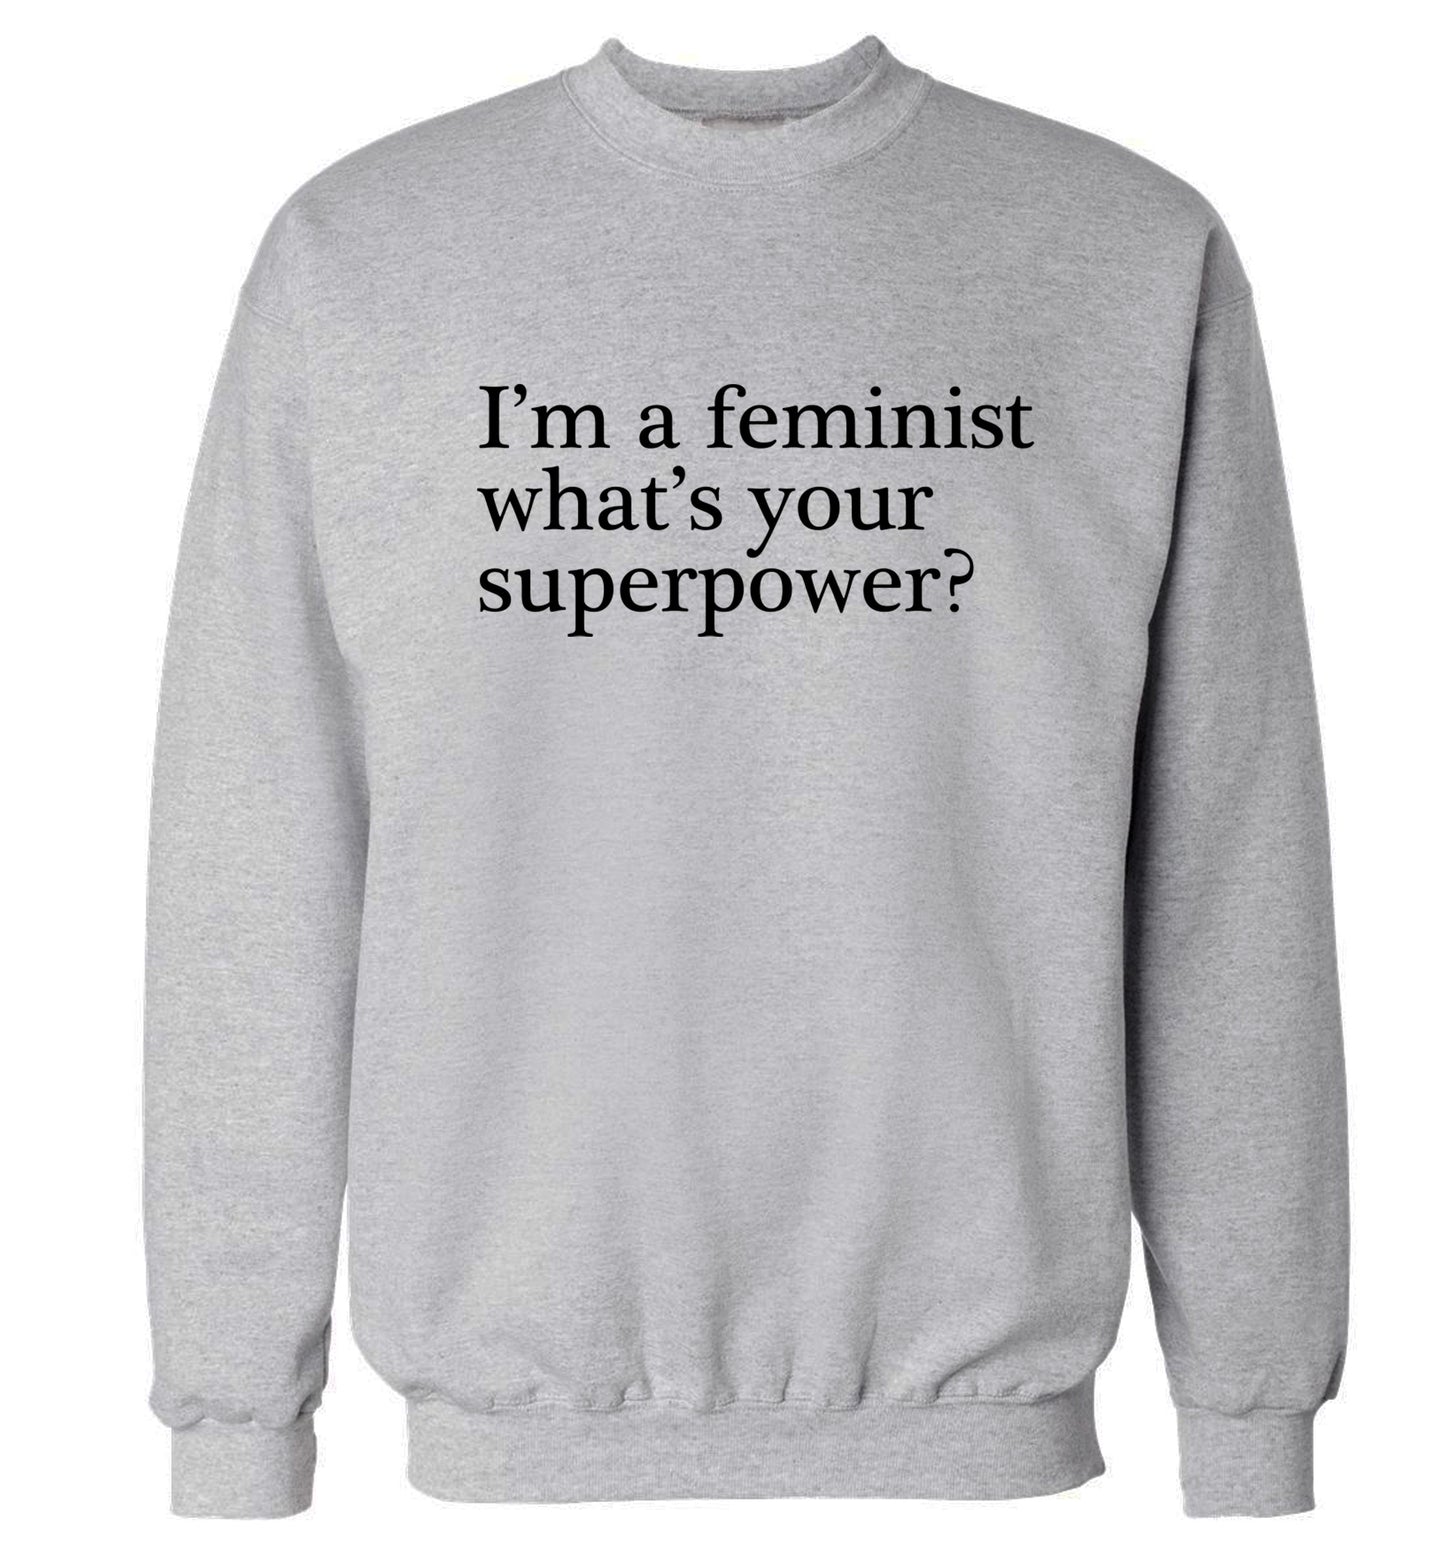 I'm a feminist what's your superpower? Adult's unisex grey Sweater 2XL